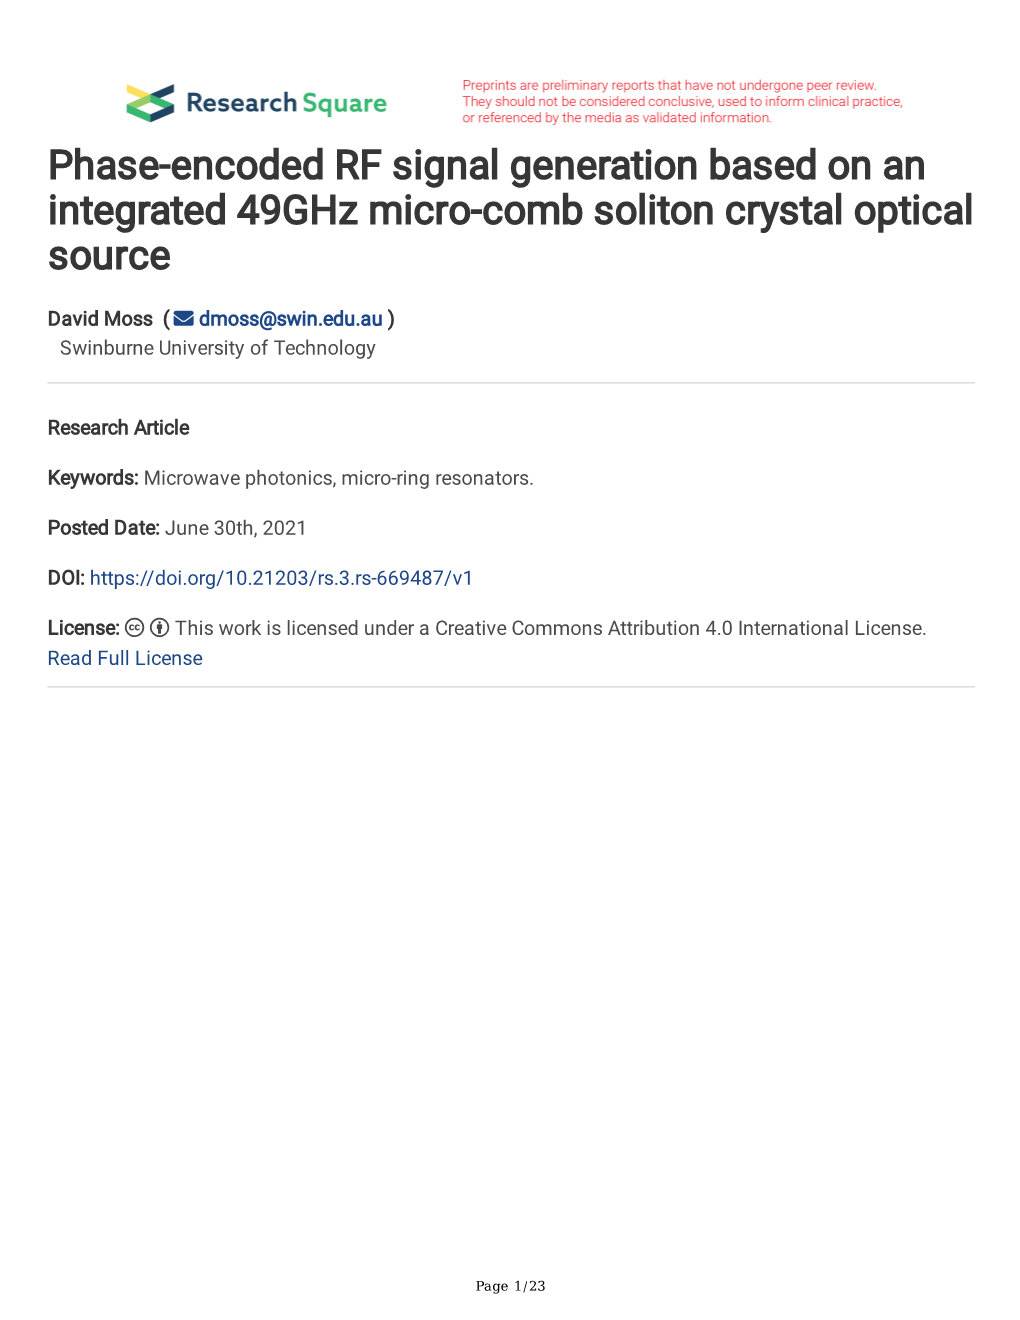 Phase-Encoded RF Signal Generation Based on an Integrated 49Ghz Micro-Comb Soliton Crystal Optical Source